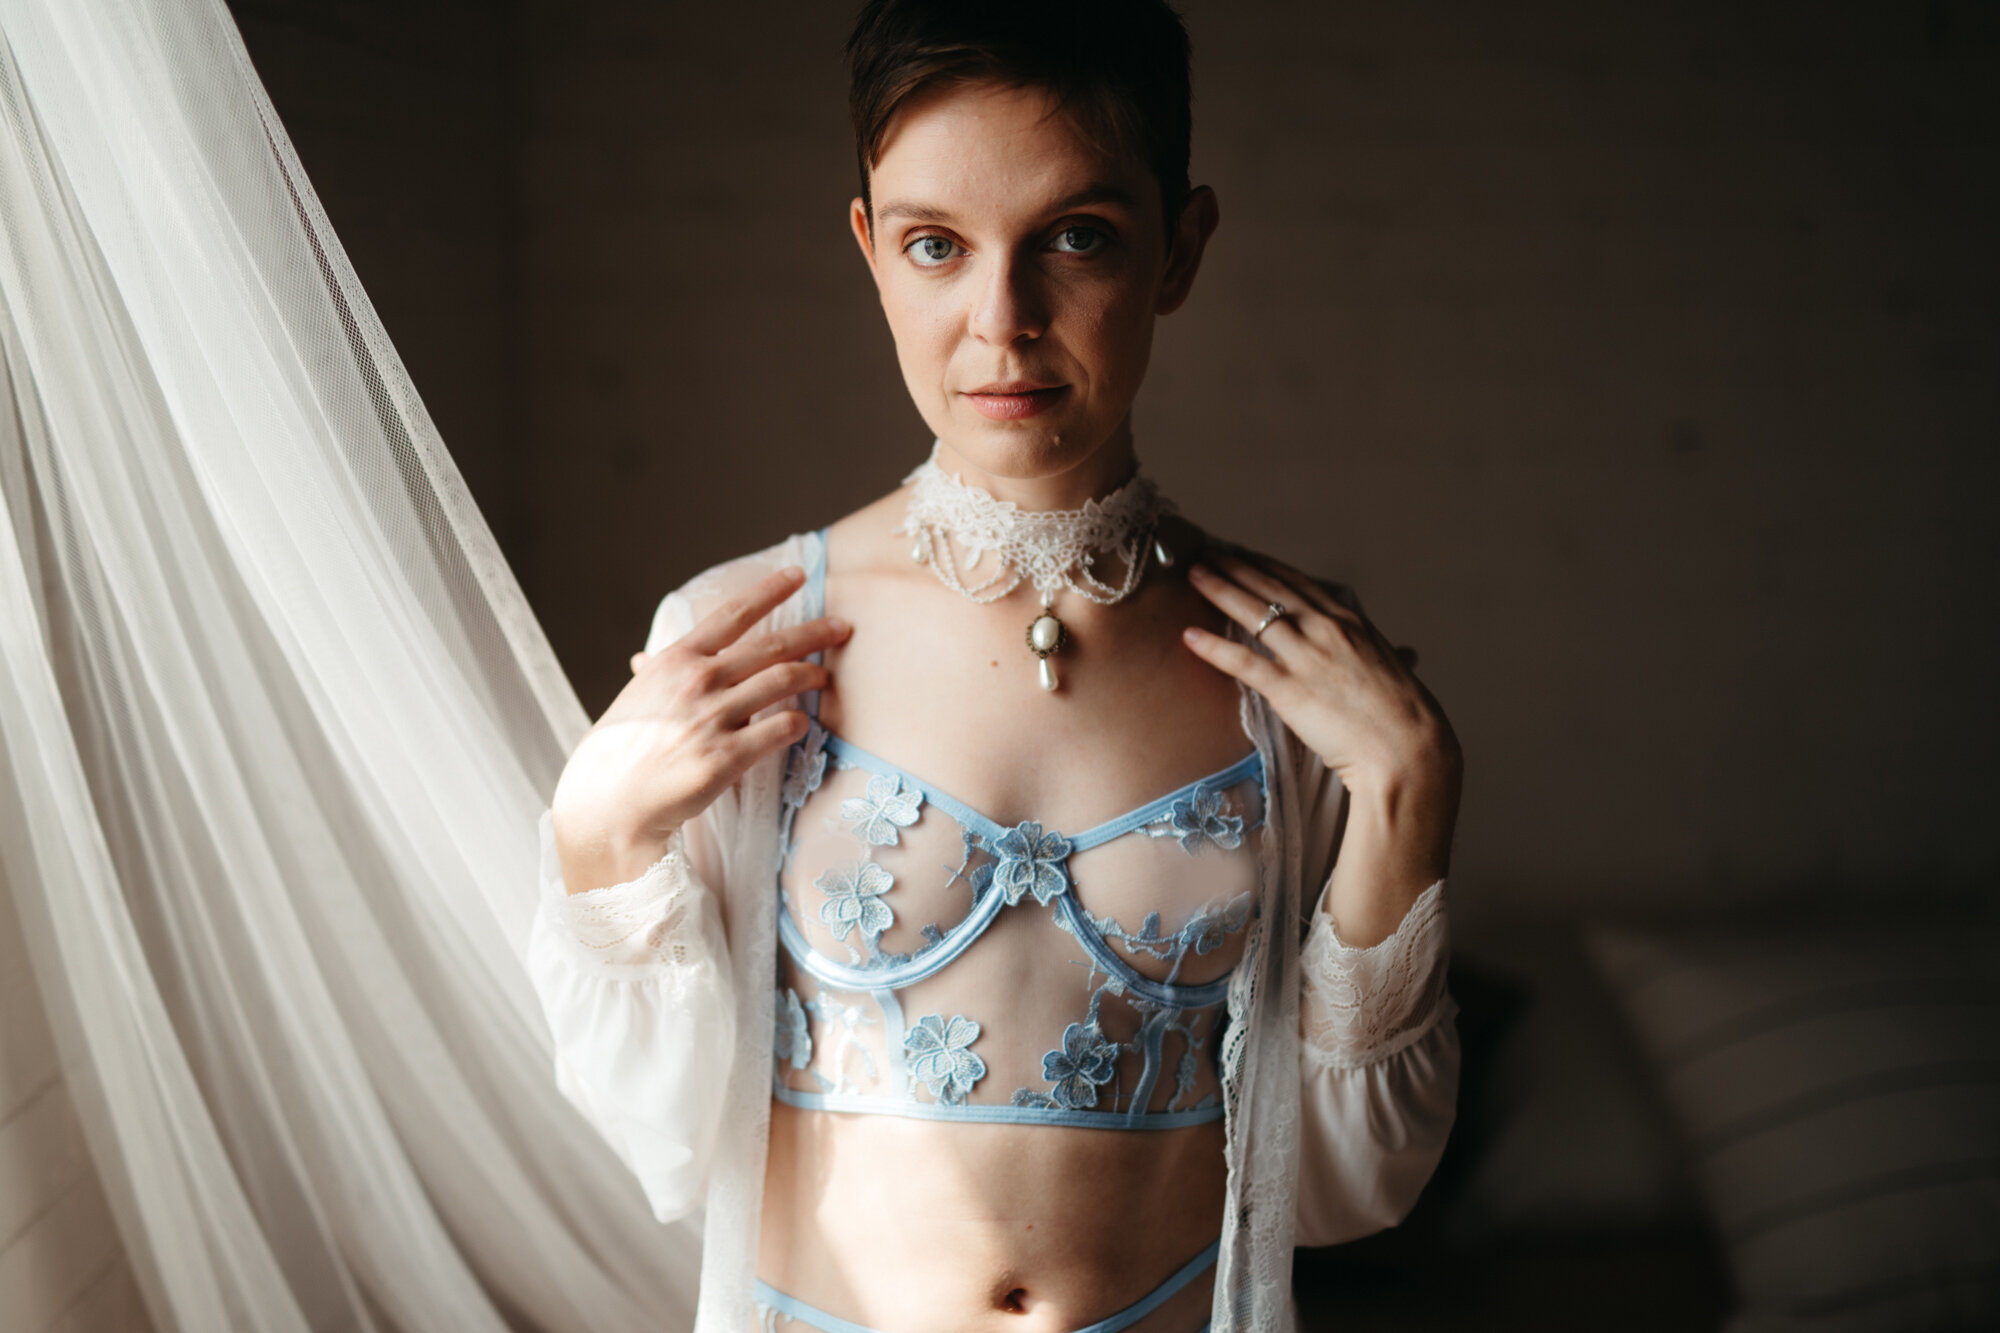 Genderqueer person wearing blue lingerie set and a white robe while lightly touching their collarbone